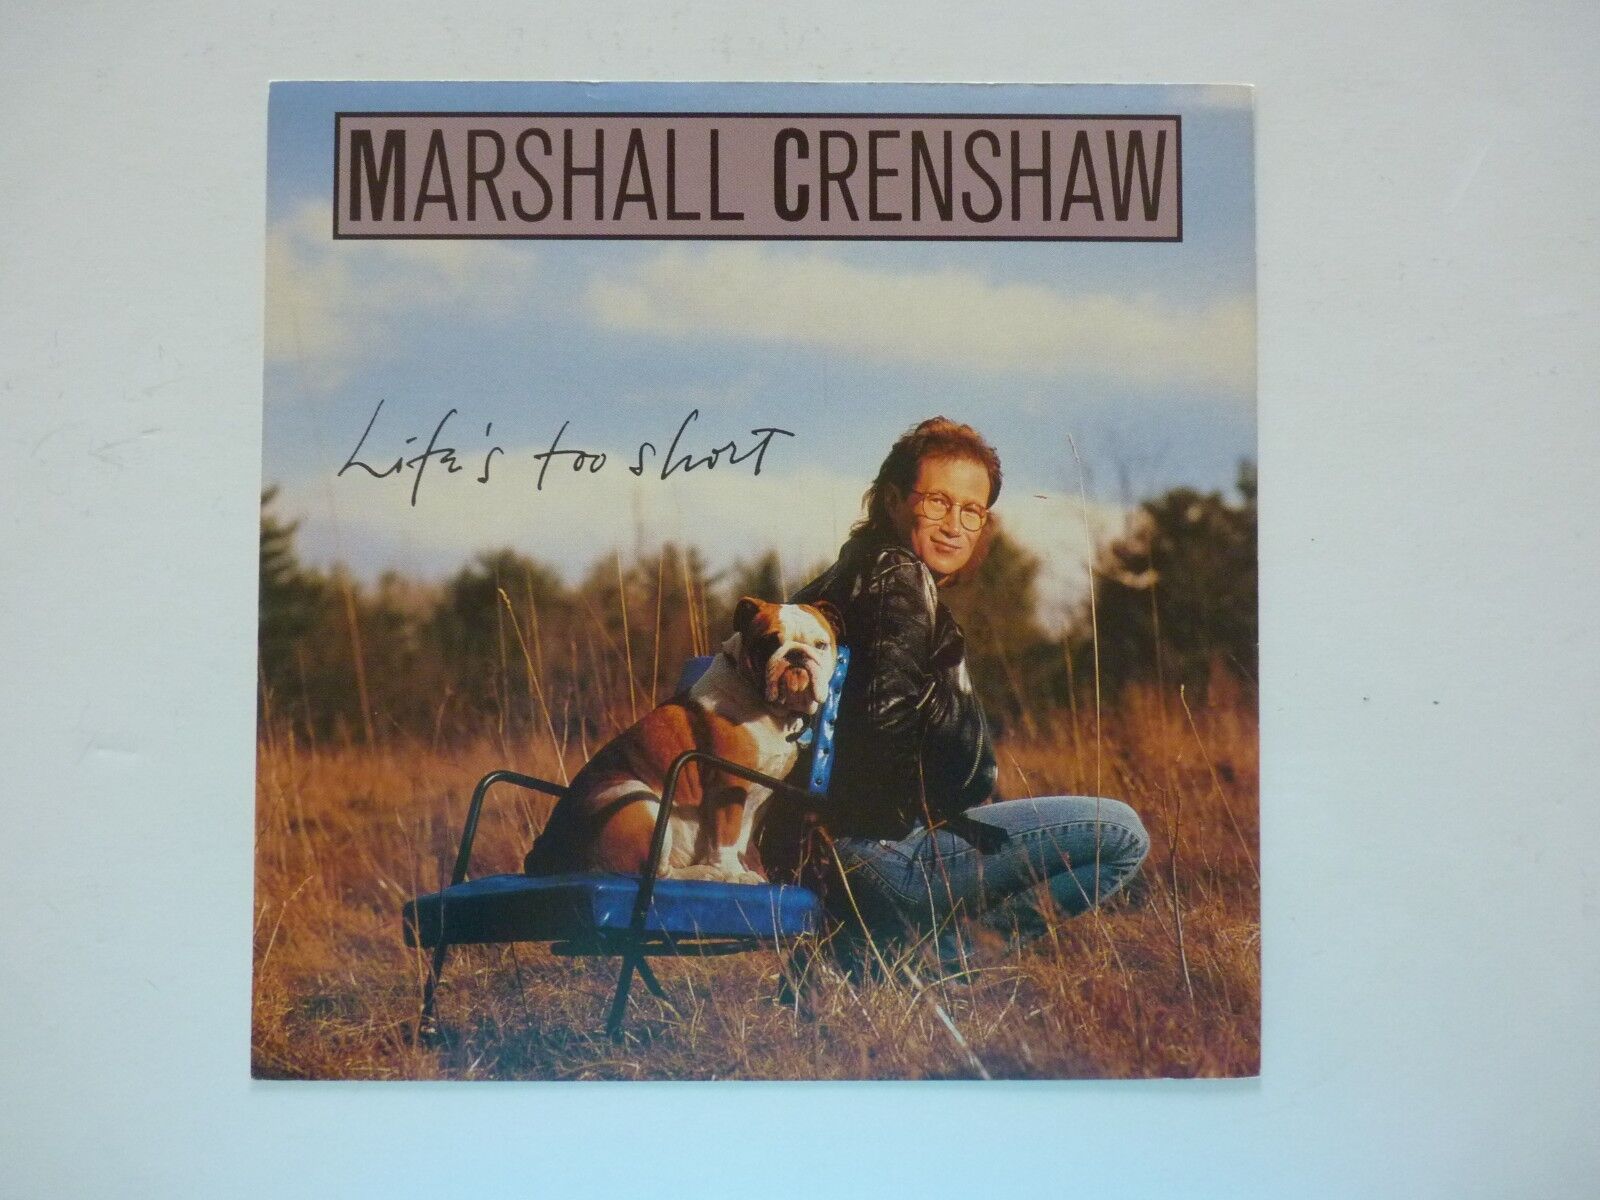 Marshall Crenshaw Life's Too Short LP Record Photo Poster painting Flat 12x12 Poster